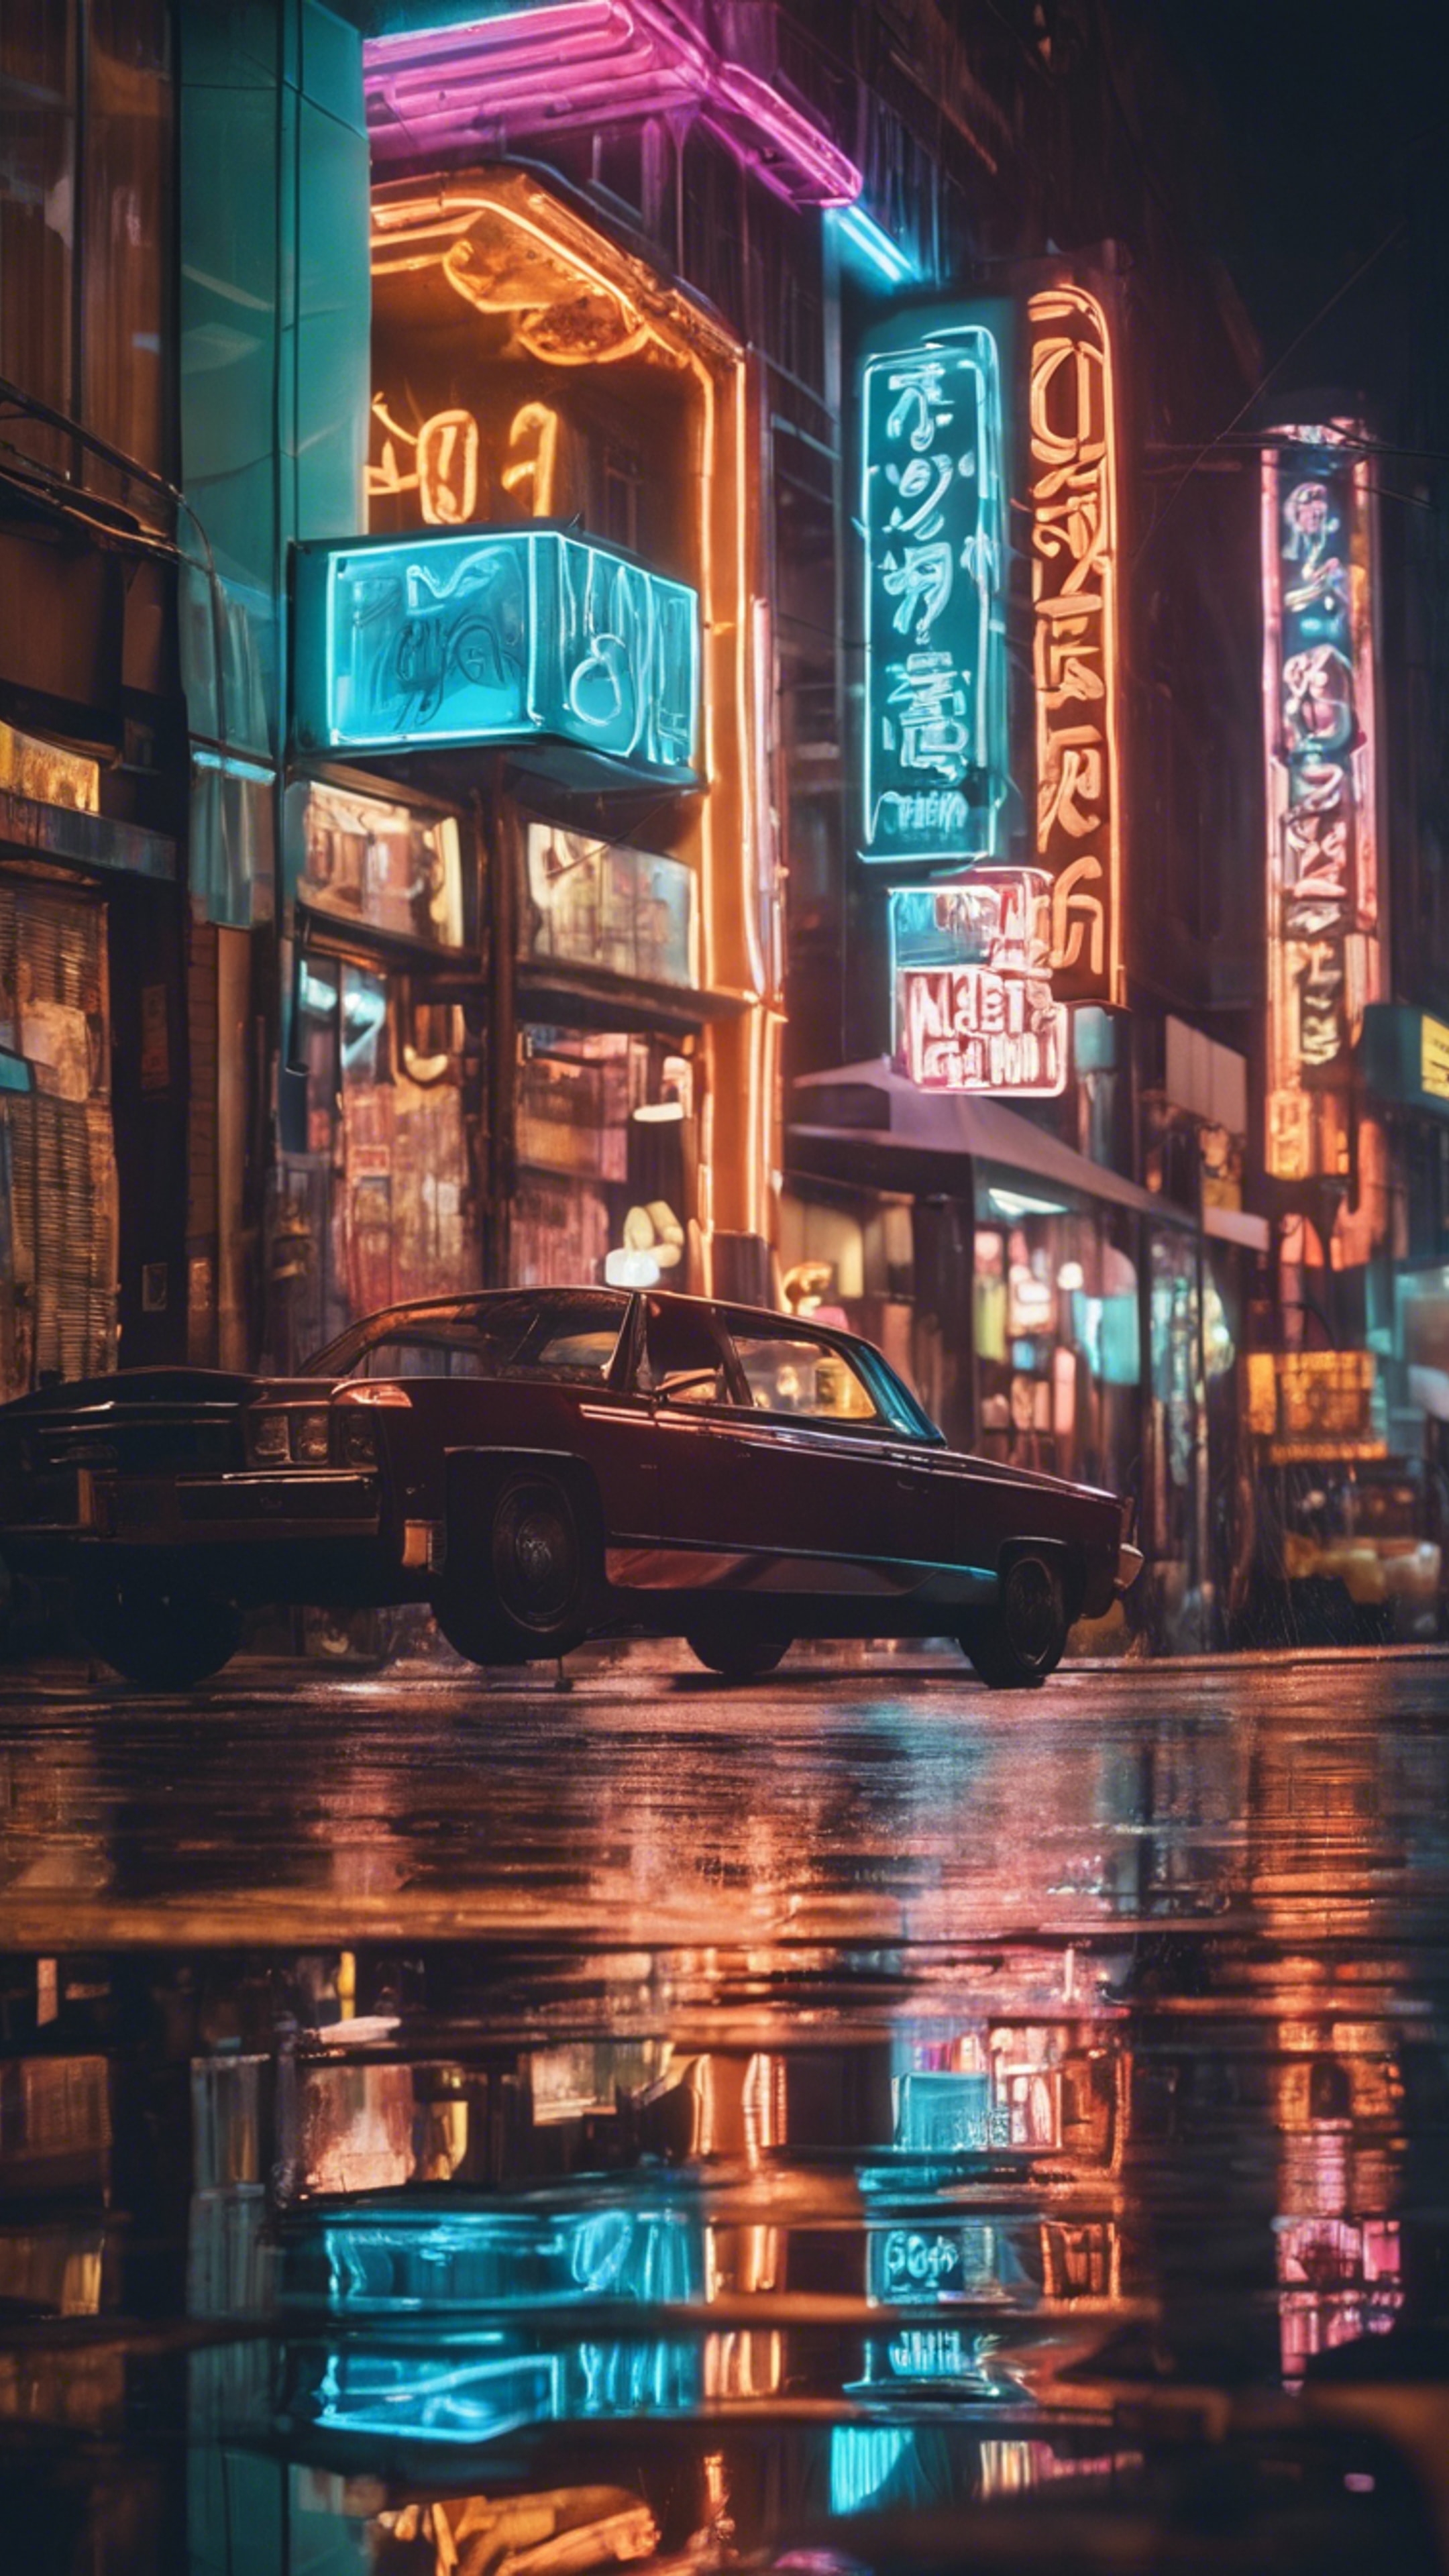 A dream vision of neon signs reflected on wet city streets at night. 墙纸[79232e509baa4ed0a24c]